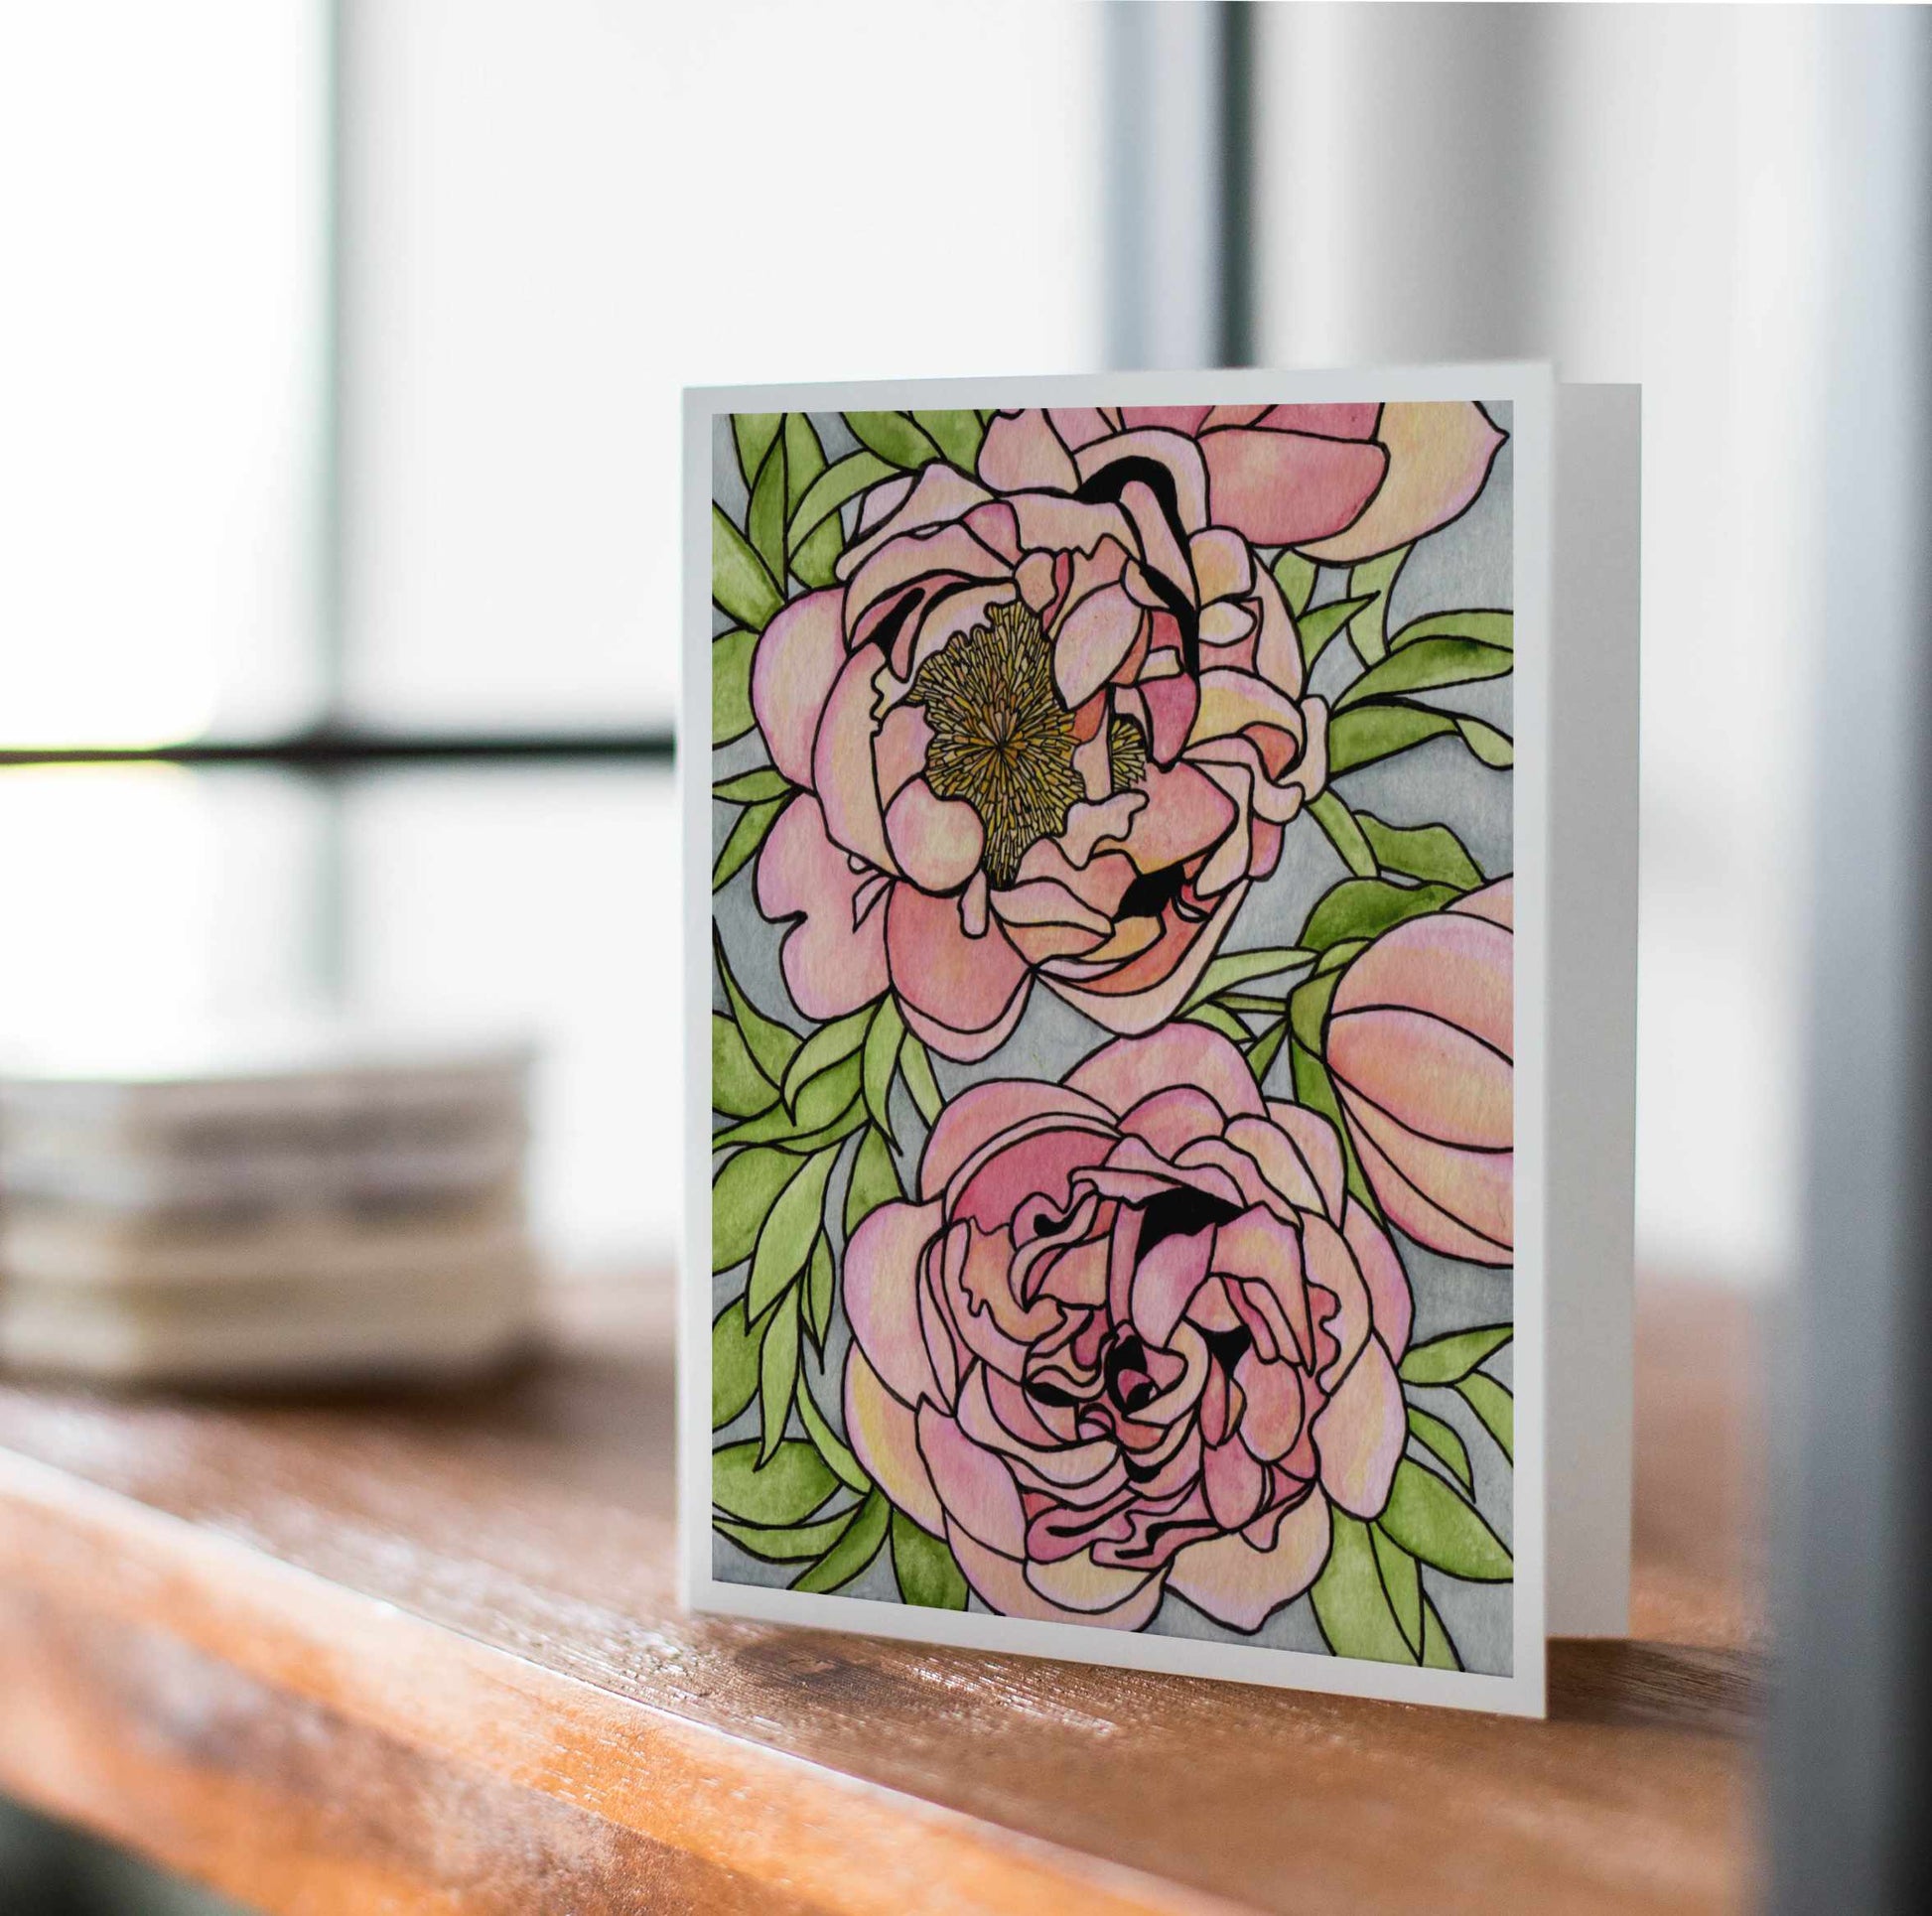 PinkPolish Design Card Pack "Floral" 4 Card Pack of Handmade Notecards